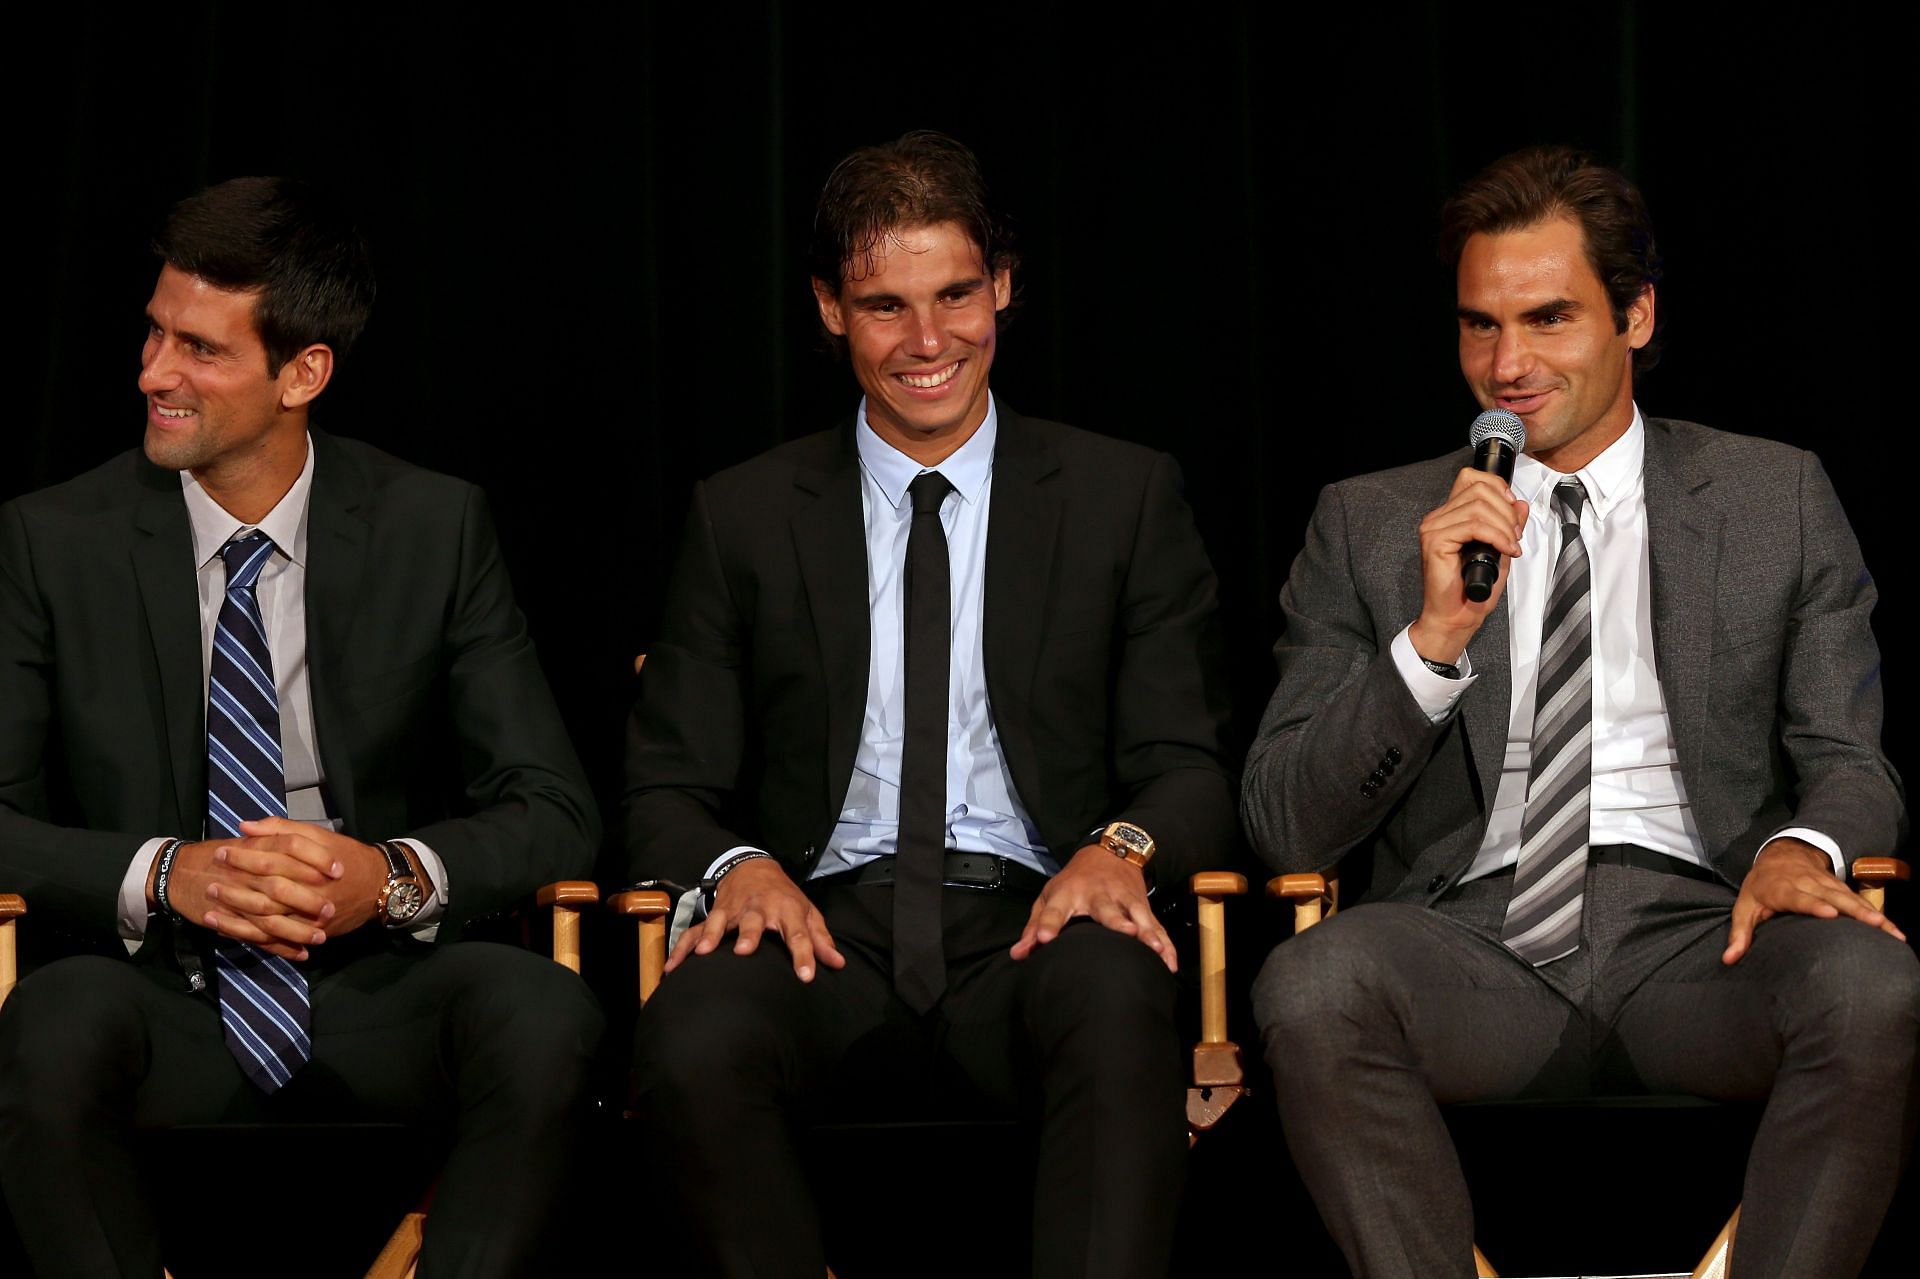 (L-R): Djokovic, Nadal and Federerhave produced some memorable matches against each other.